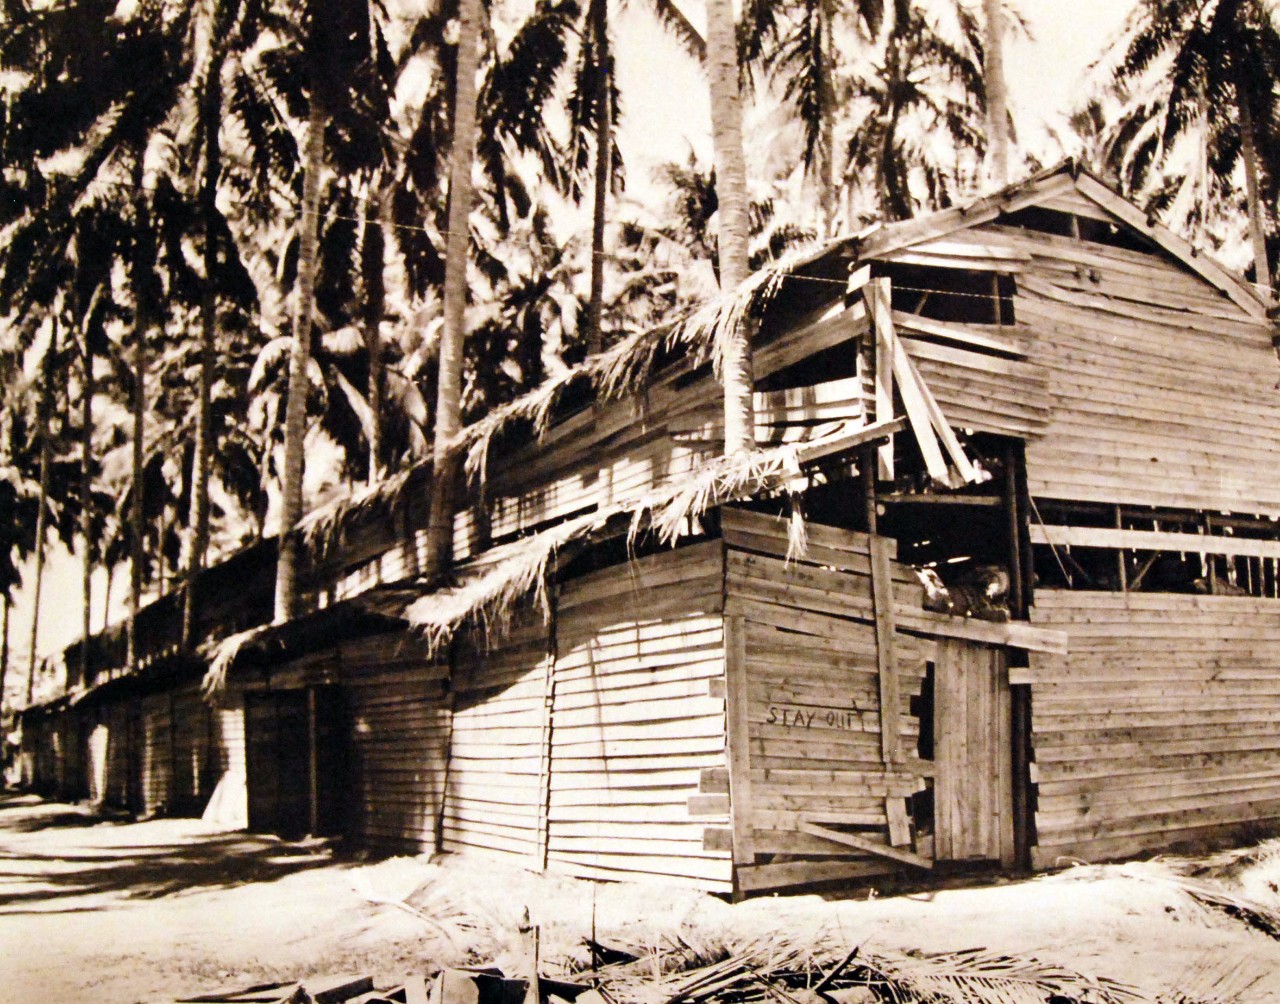 80-G-16321:   Guadalcanal Campaign, August 1942-February 1943.   Captured Japanese warehouse, Guadalcanal Island, circa late 1942.  Official U.S. Navy Photograph, now in the collections of the National Archives.   (2014/06/12).